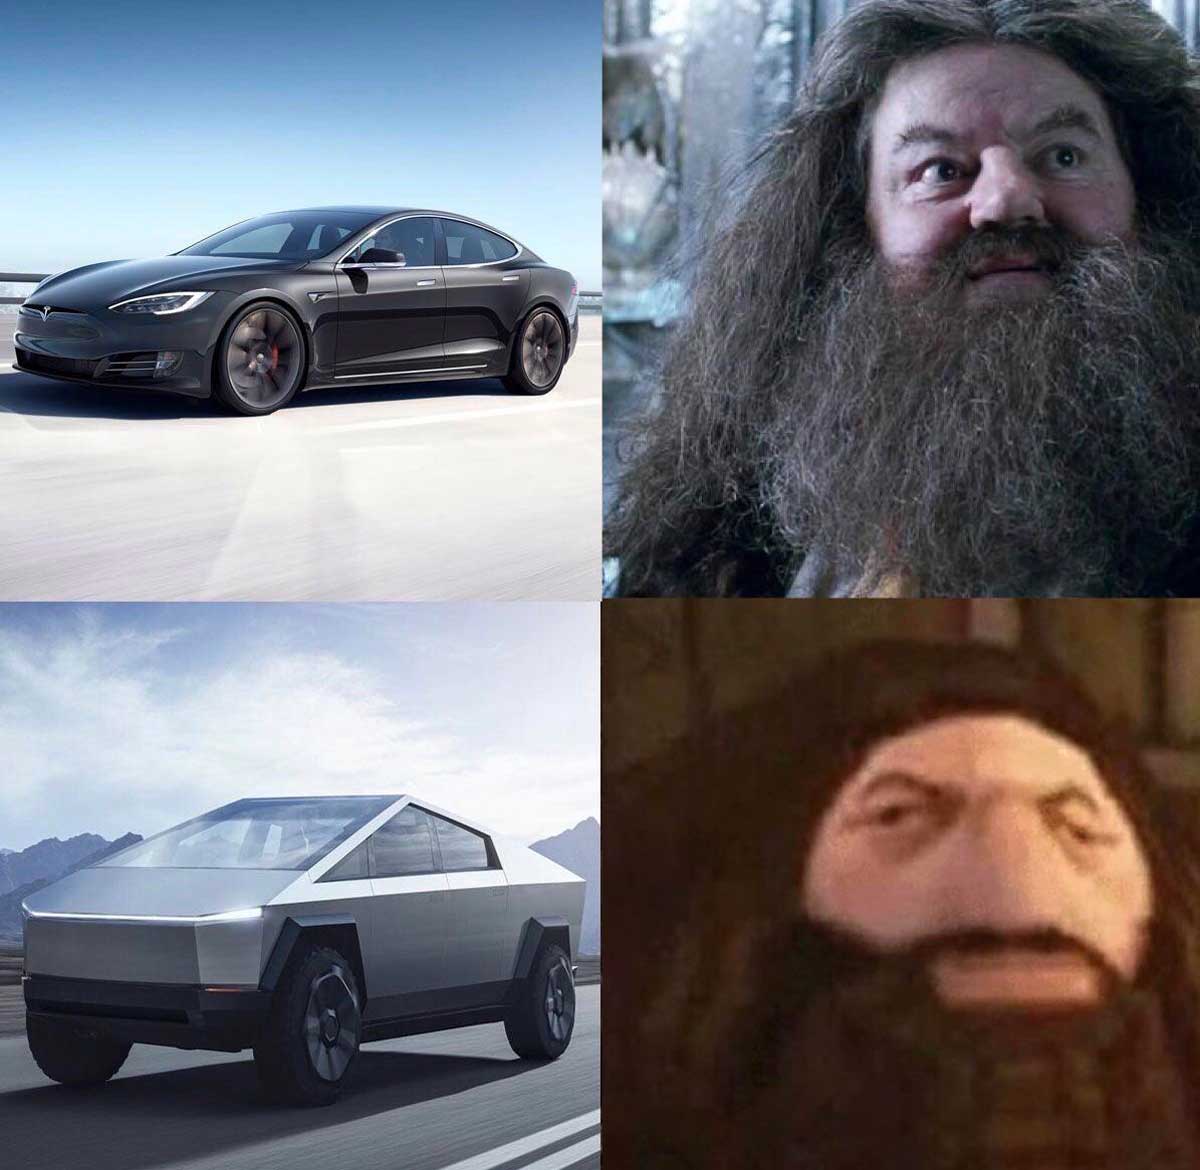 Cybertruck meme of a beautiful Tesla car and an image of Hagrid from Harry Potter then a picture of the Cybertruck with a low quality rendering of Hagrid from a Harry Potter video game